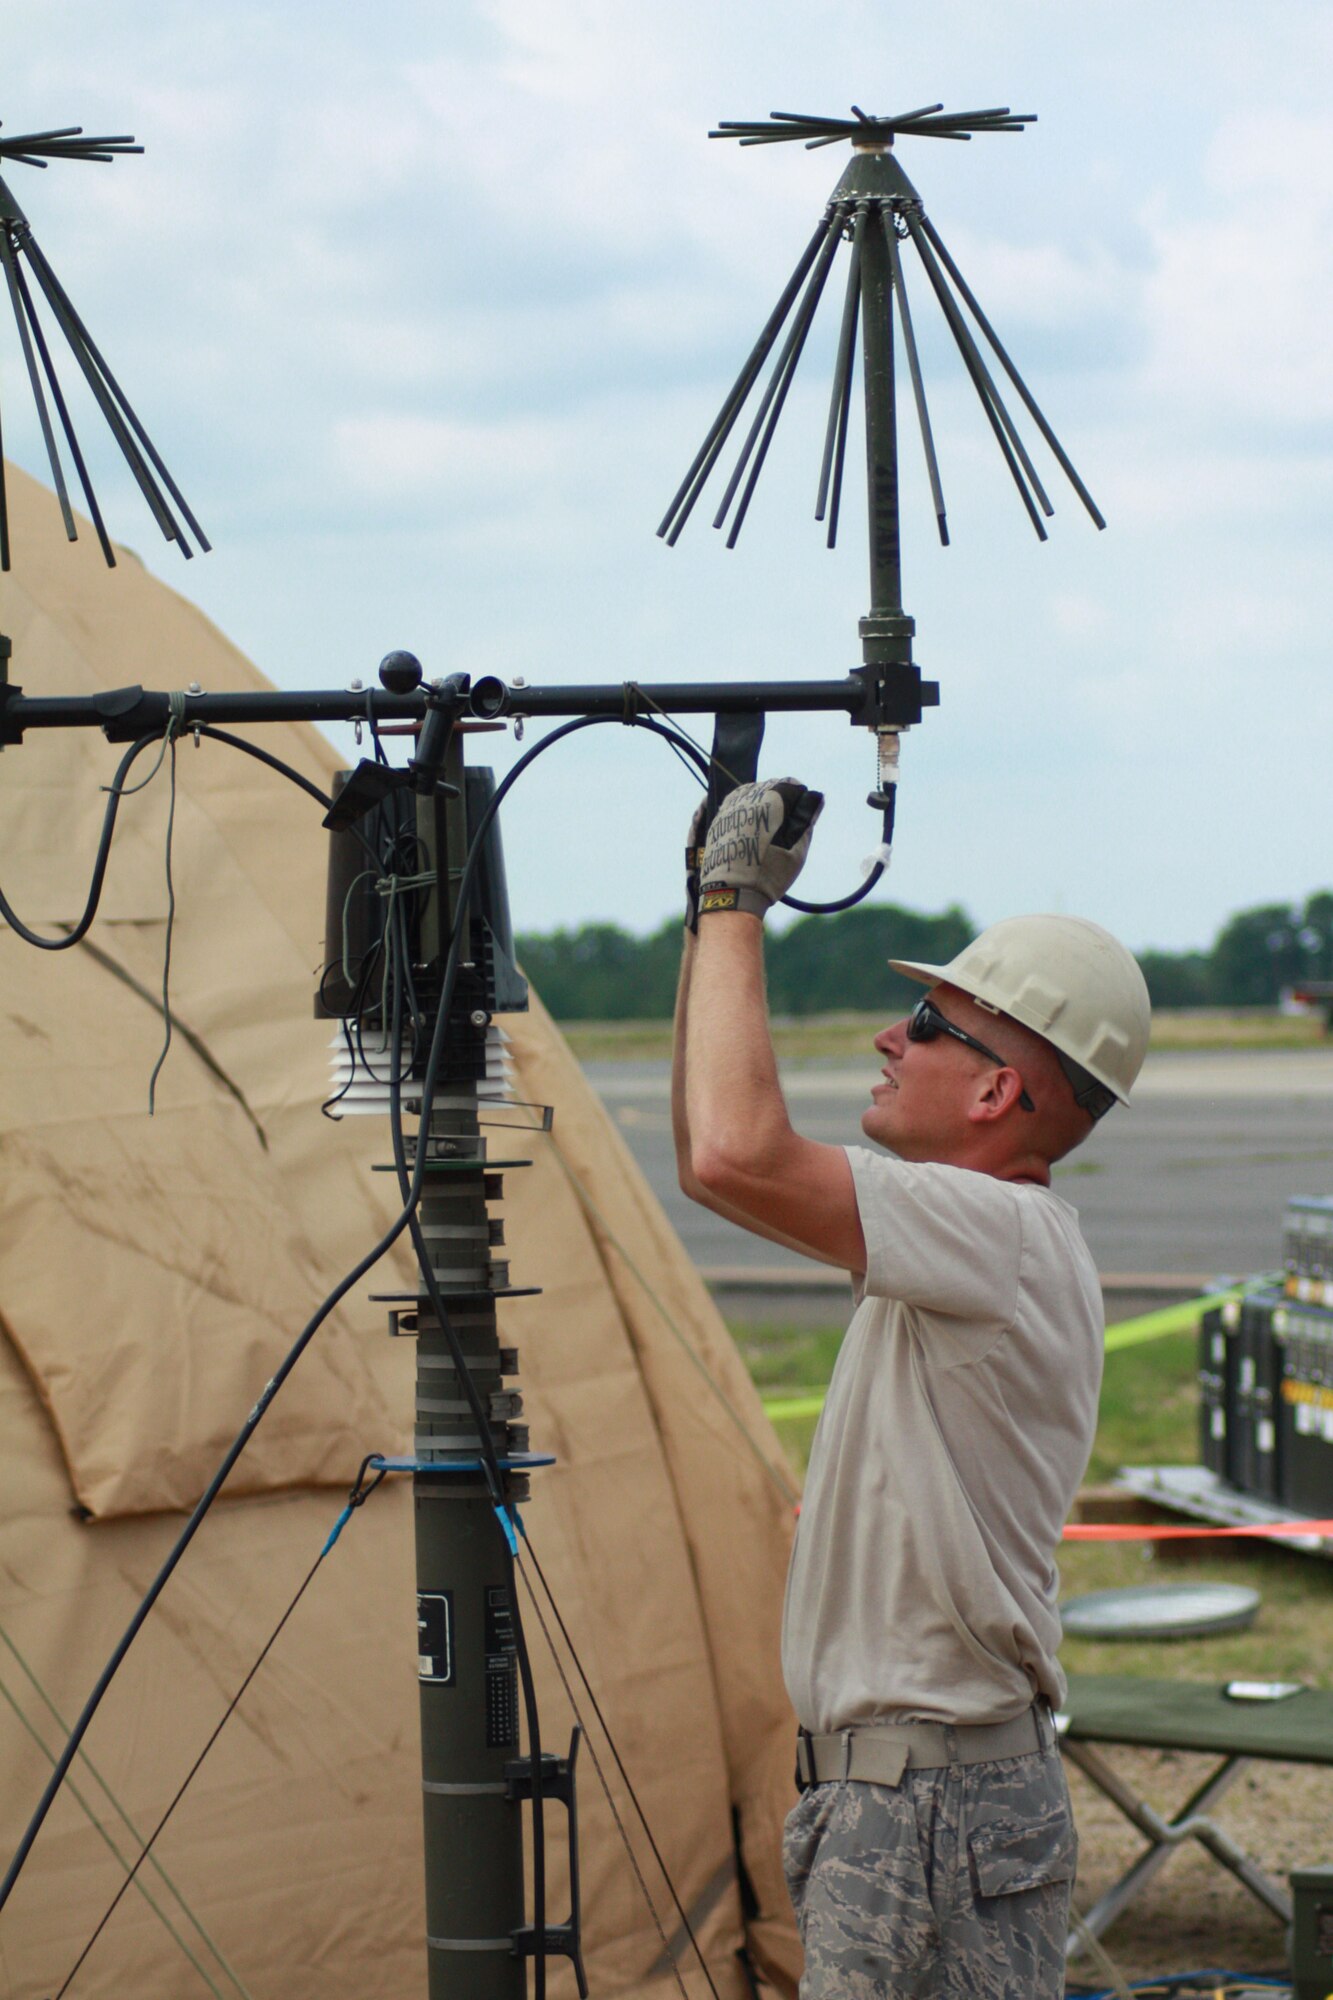 TSgt Philip Seif from the Kentucky Air National Guard's 123rd Contingency Response Group based out of Louisville, Ky.,  assembles a communications antenna at Lakehurst Air Field at McGuire Air Force Base after arriving to provide humanitarian assistance as part of a joint exercise on July 28.
 (U.S. Air Force photo/MSgt Phil Speck)(Released)